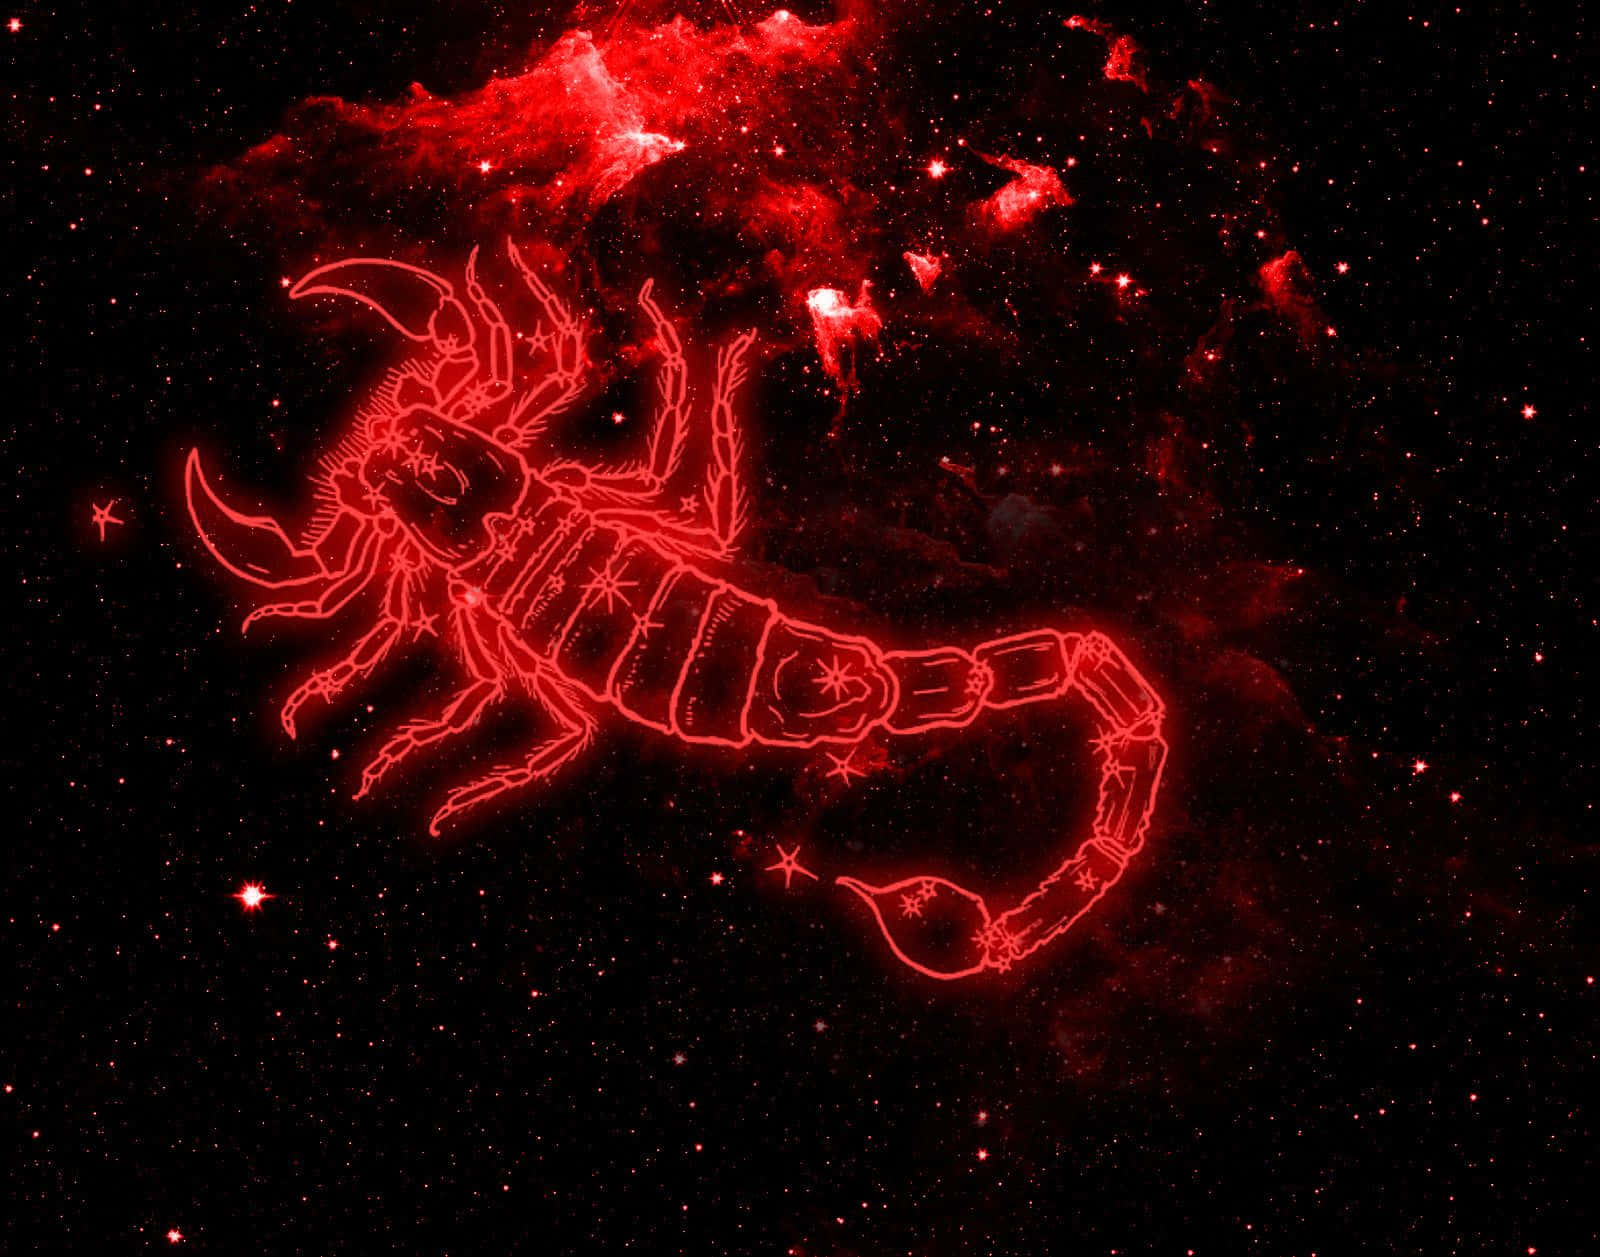 Powerful Red Scorpion on Black Background Wallpaper